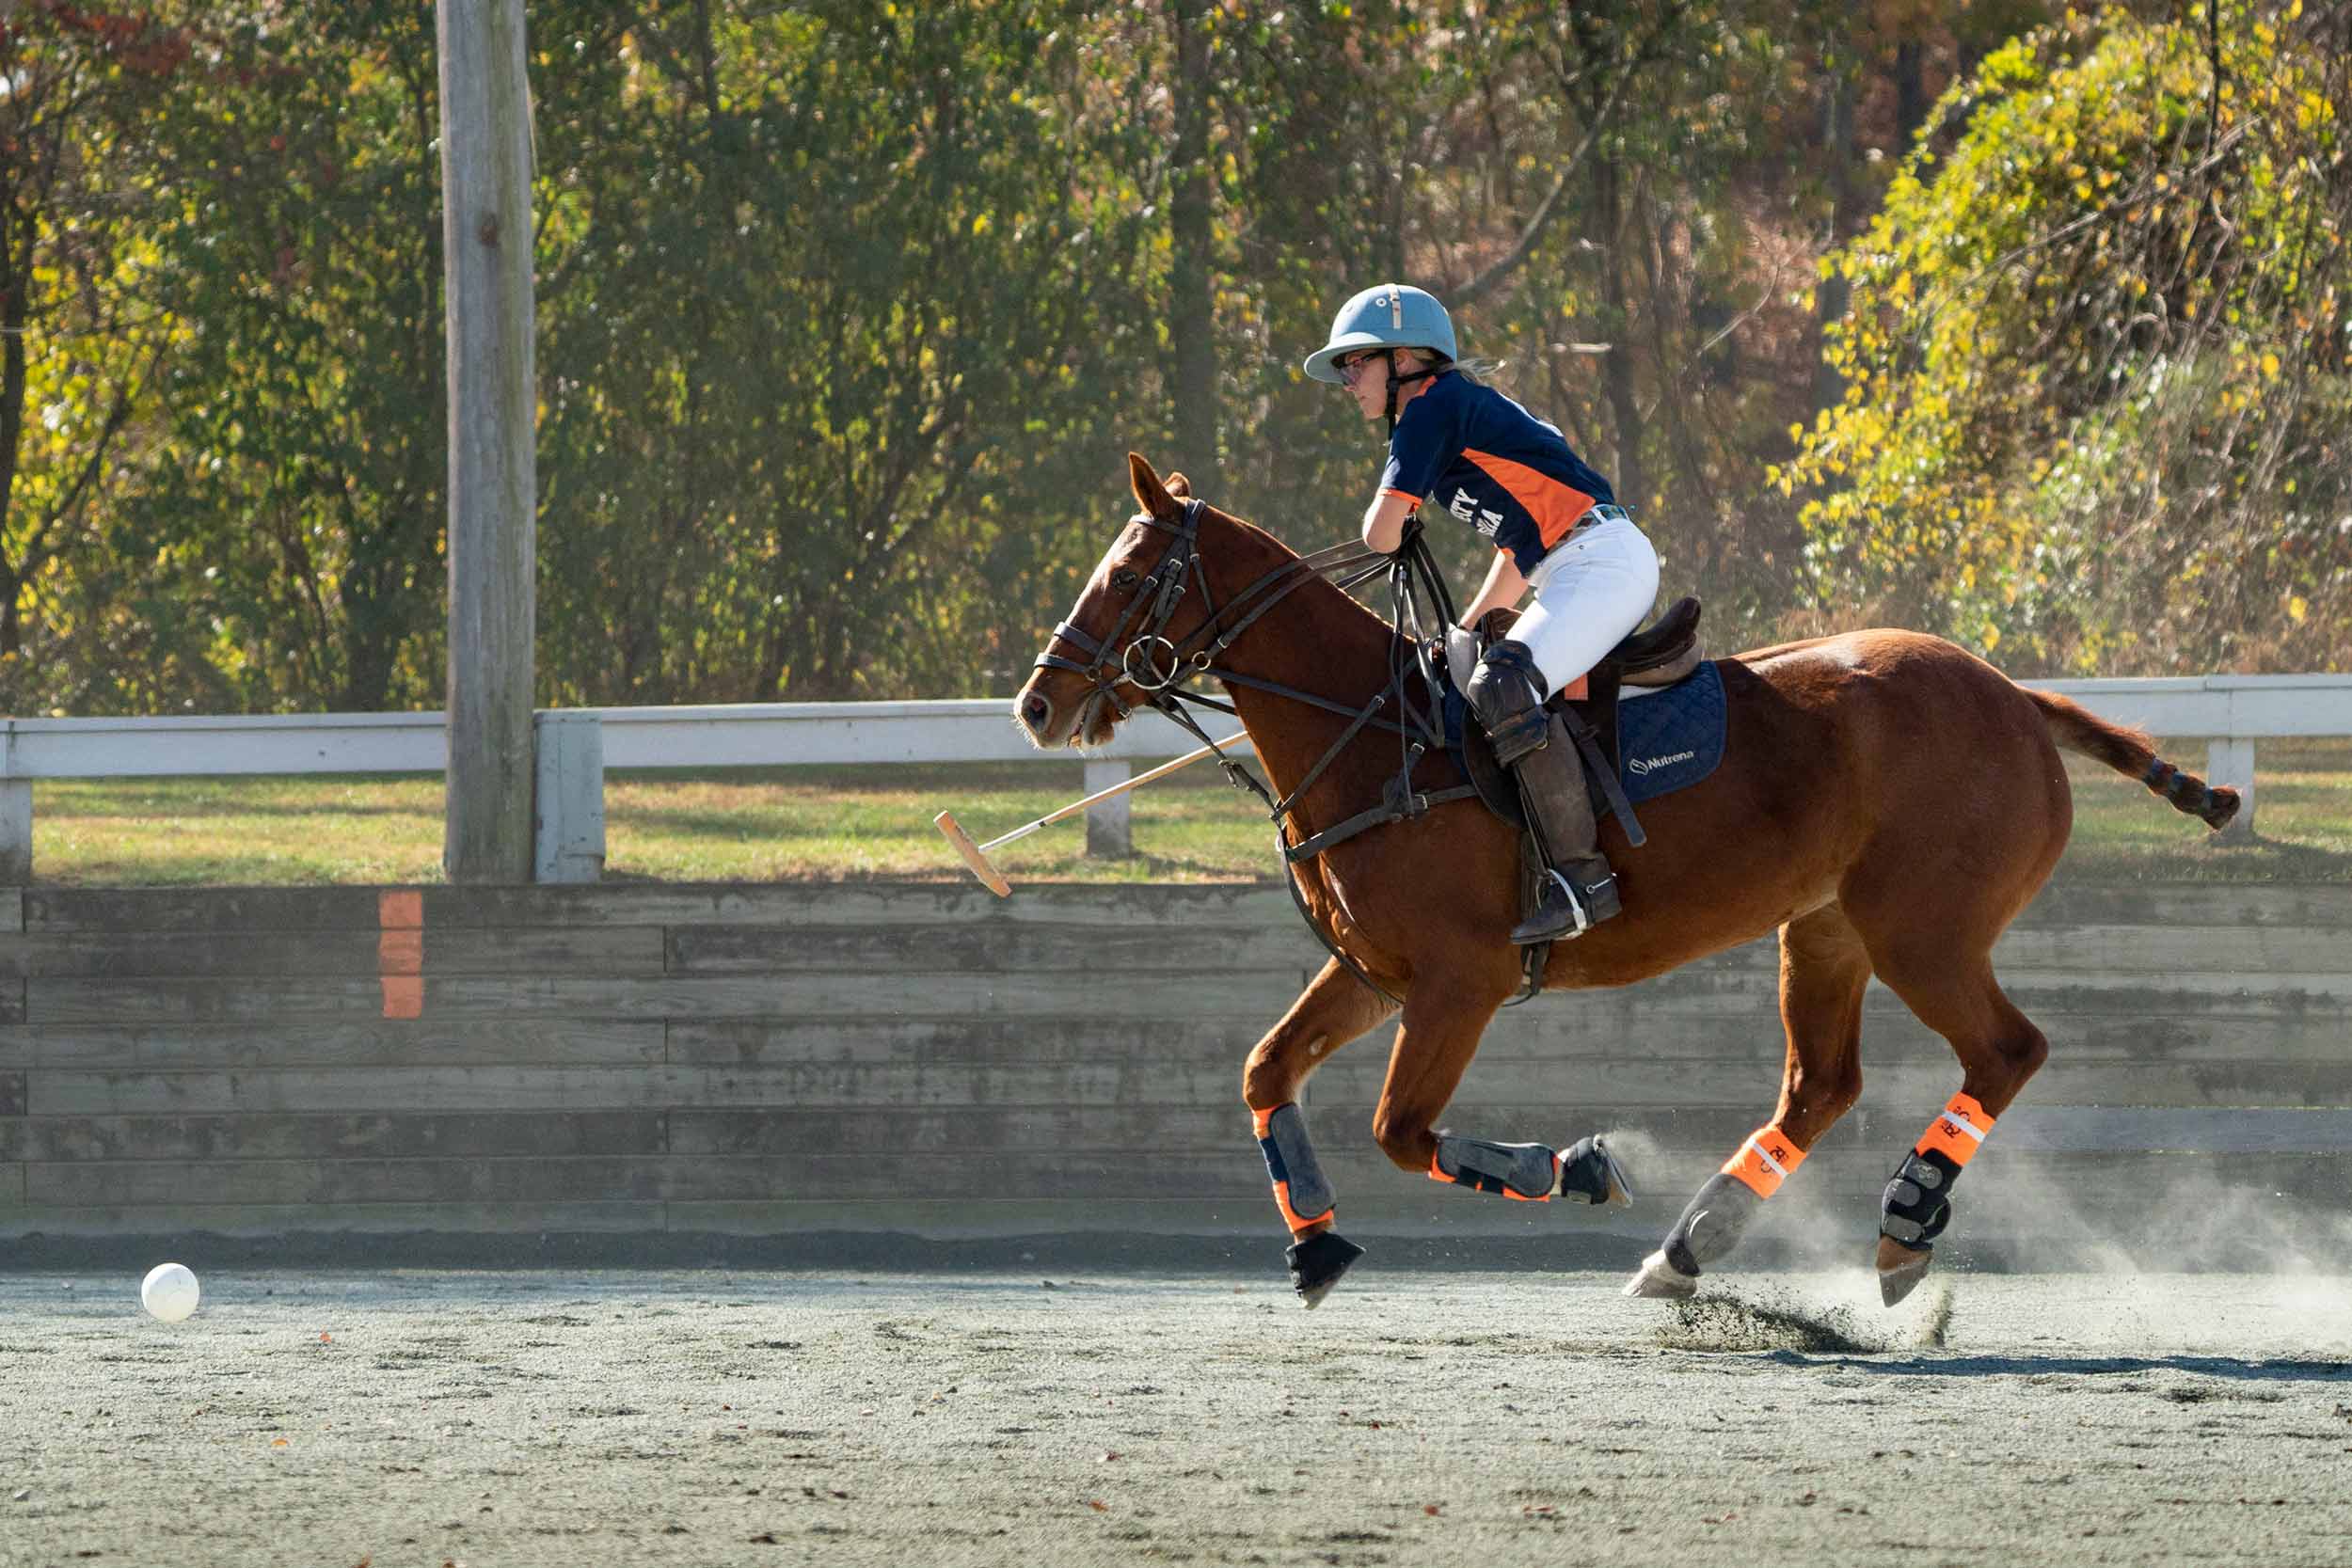 Student polo member riding a horse during a match